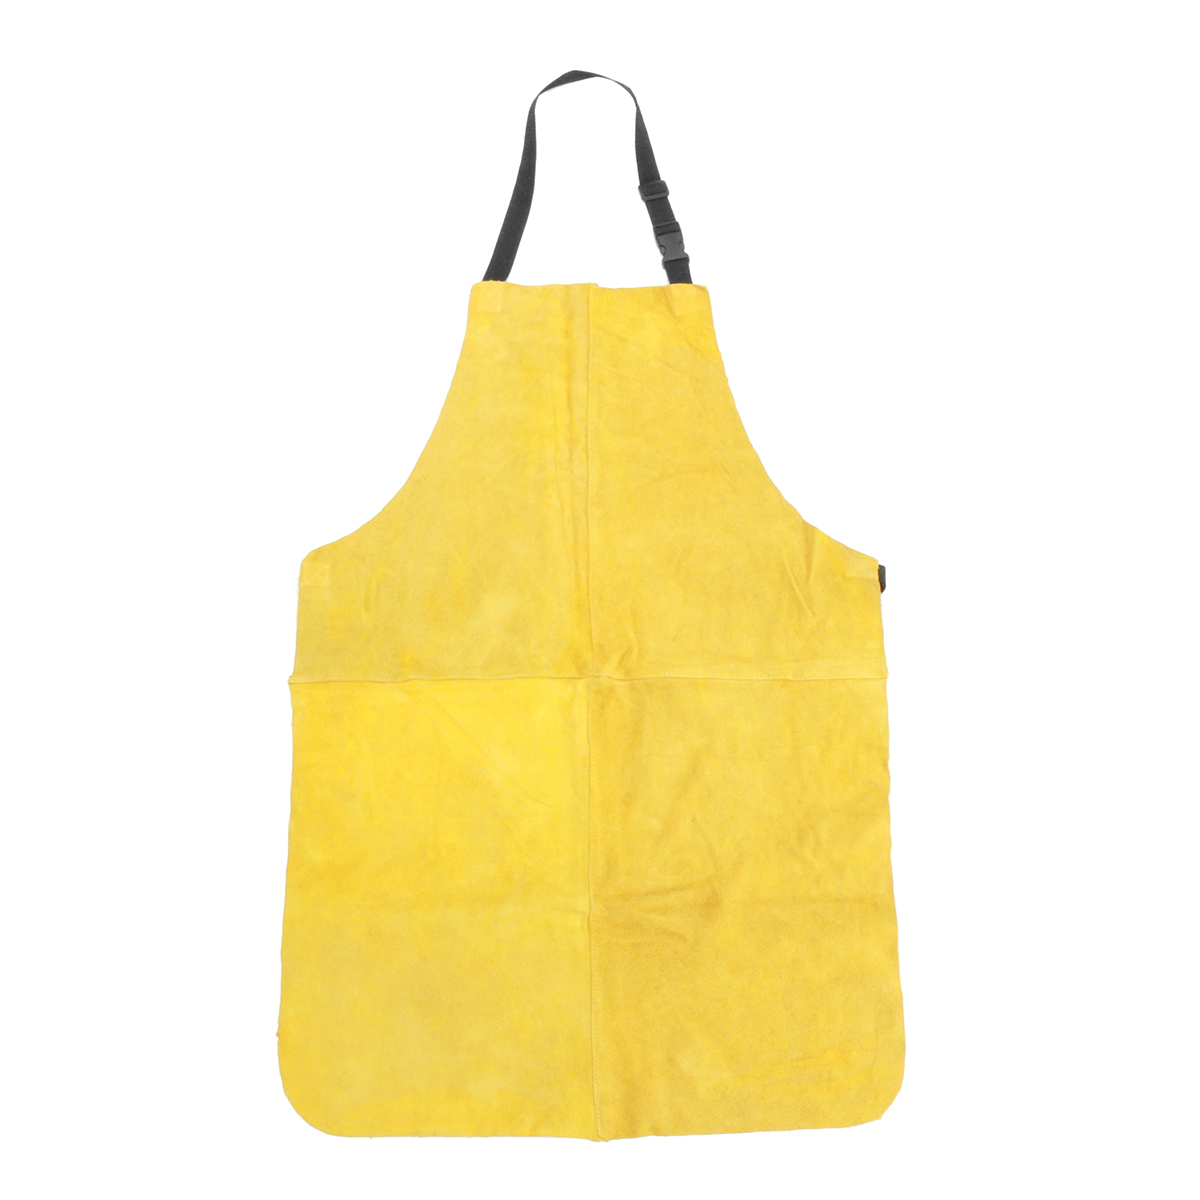 

Welders Dual Leather Heat Insulation Protective Safety Welding Apron Full Length